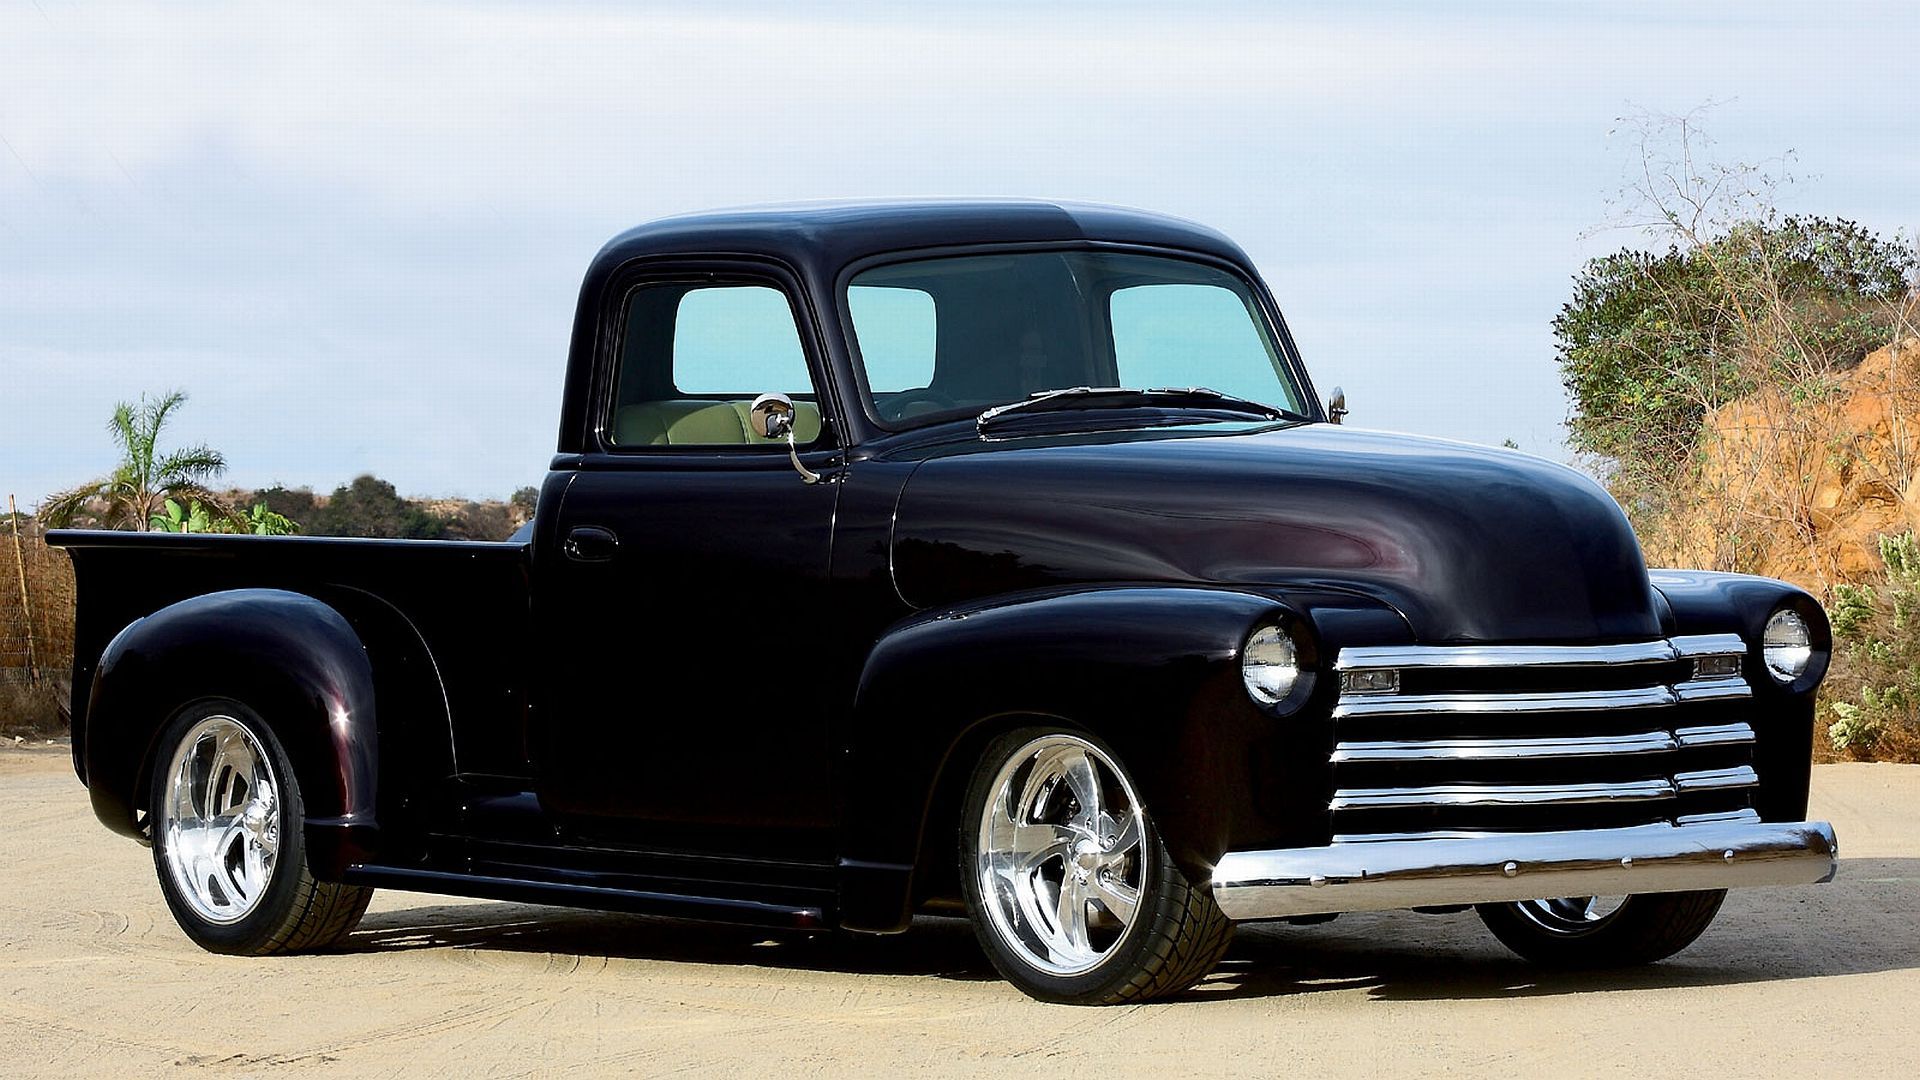 Free Download 1950 Chevy Truck Wallpaper 1920x1080 For Your Desktop Mobile Tablet Explore 44 Chevy Truck Wallpaper Gm Cars For Background Wallpaper Custom Truck Wallpaper Chevy Wallpaper